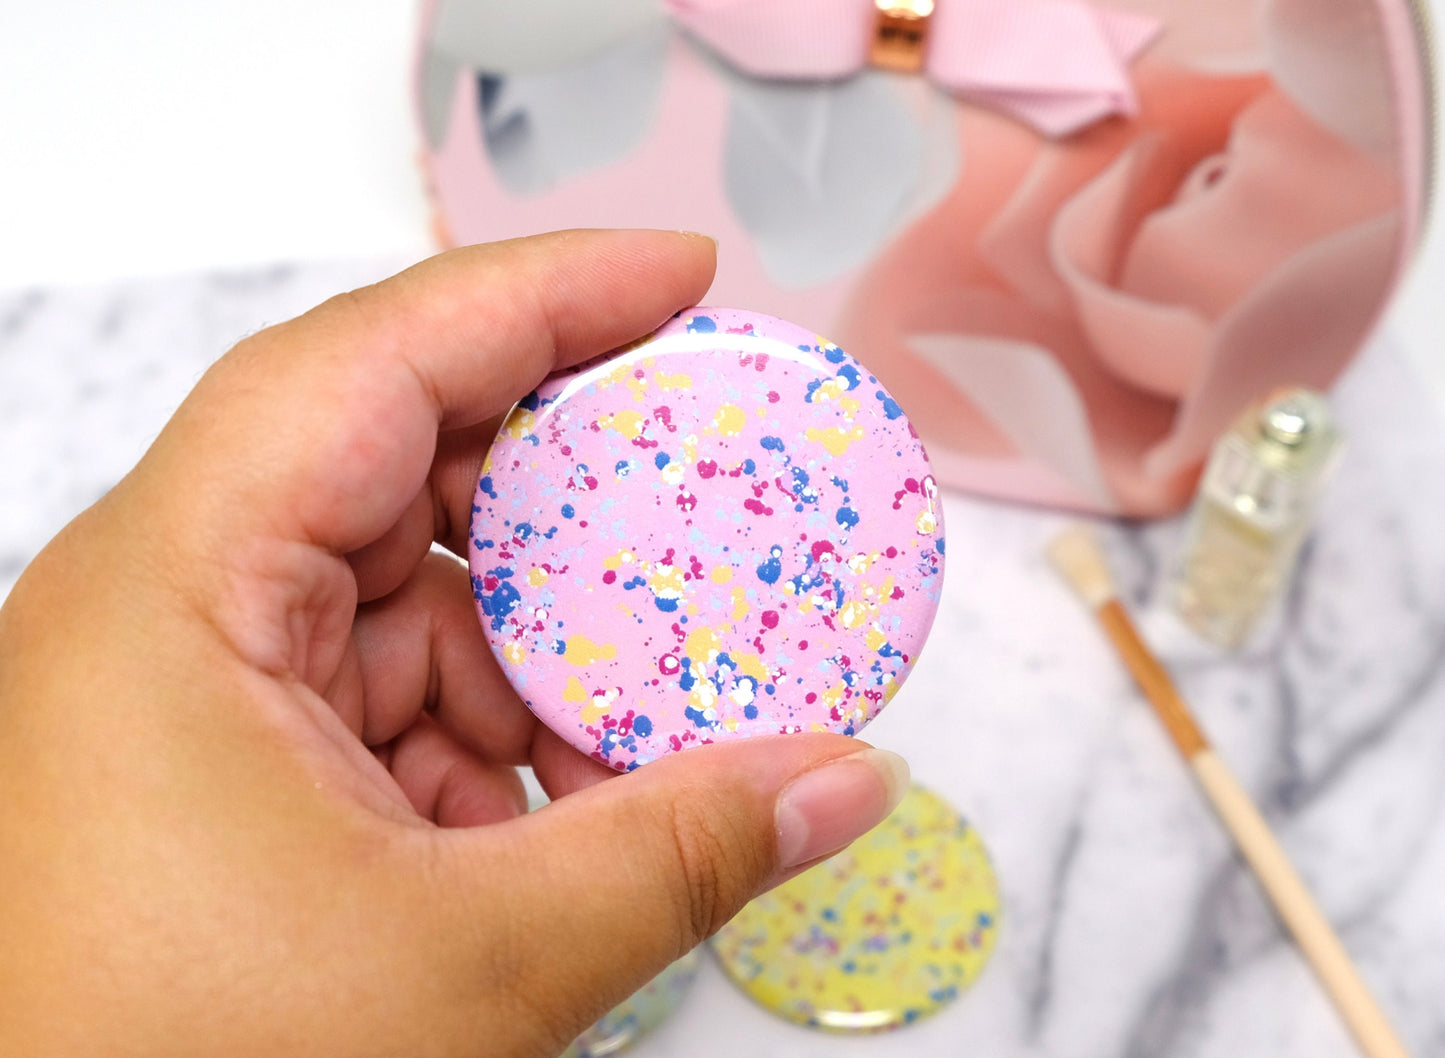 Cute Colourful and Creative 58mm Pocket Mirrors - Beauty Compact in 6 Pastel Colours - make-up pocket mirror